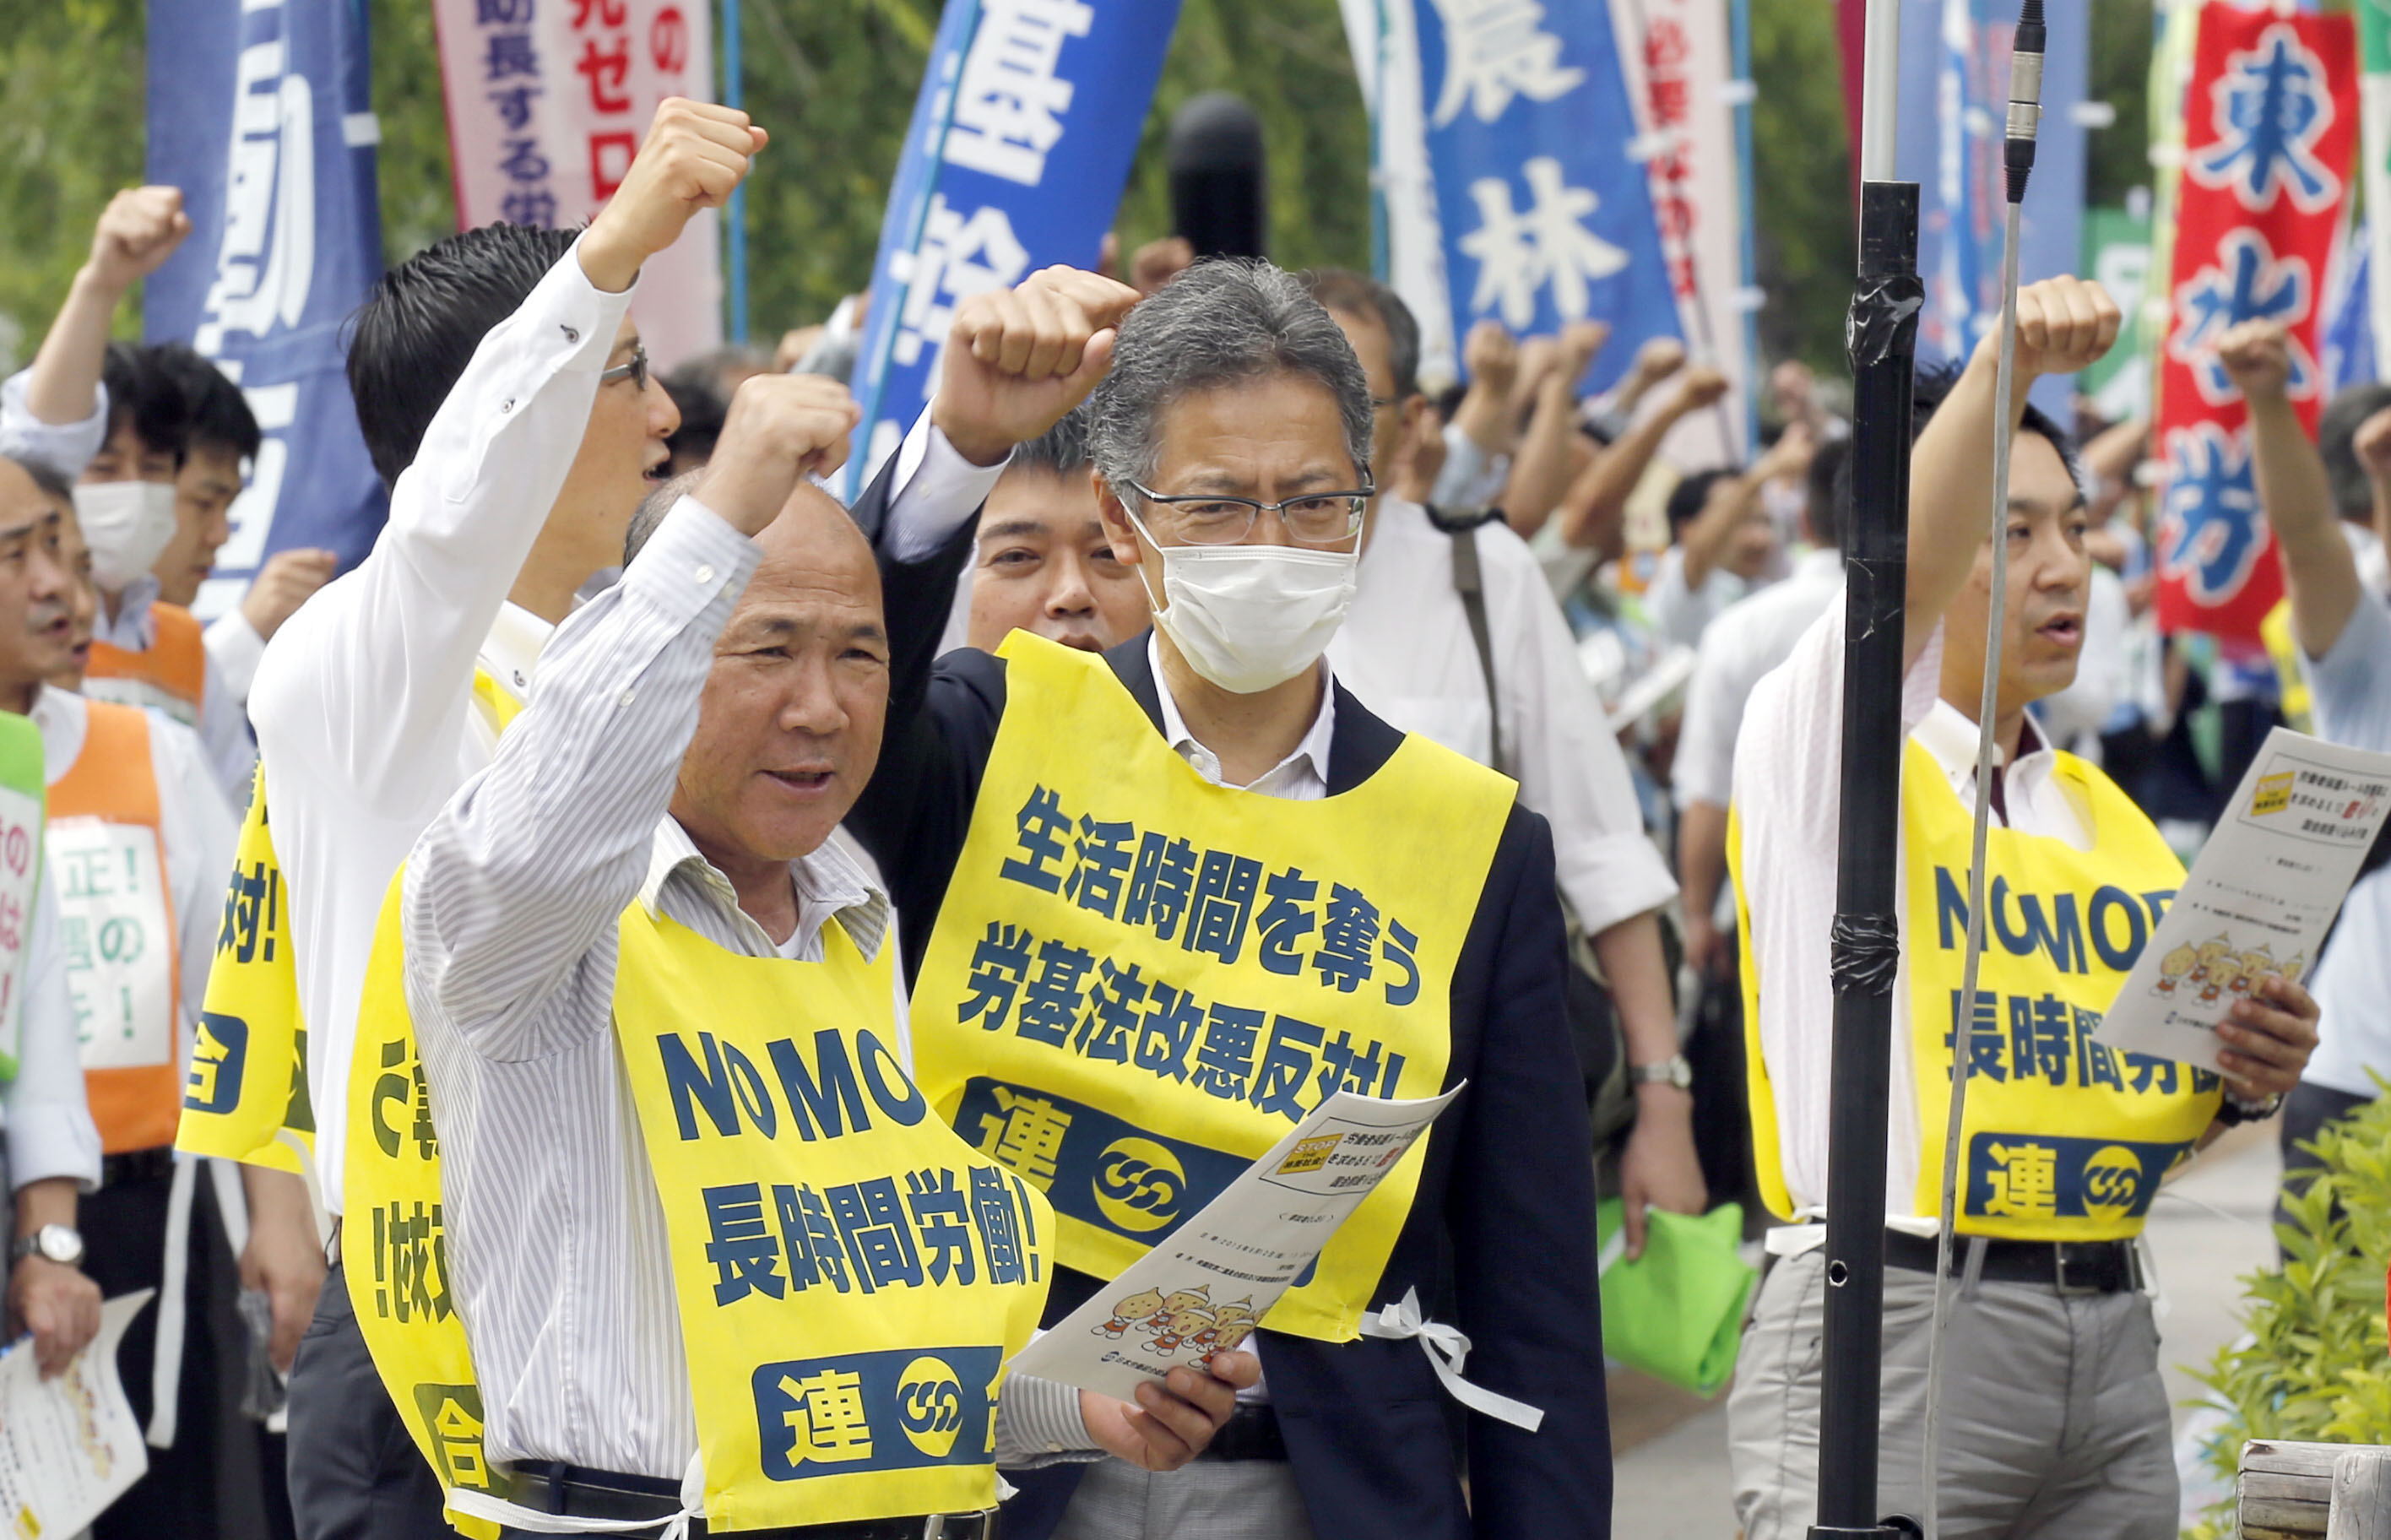 Has striking in Japan become extinct? | The Japan Times